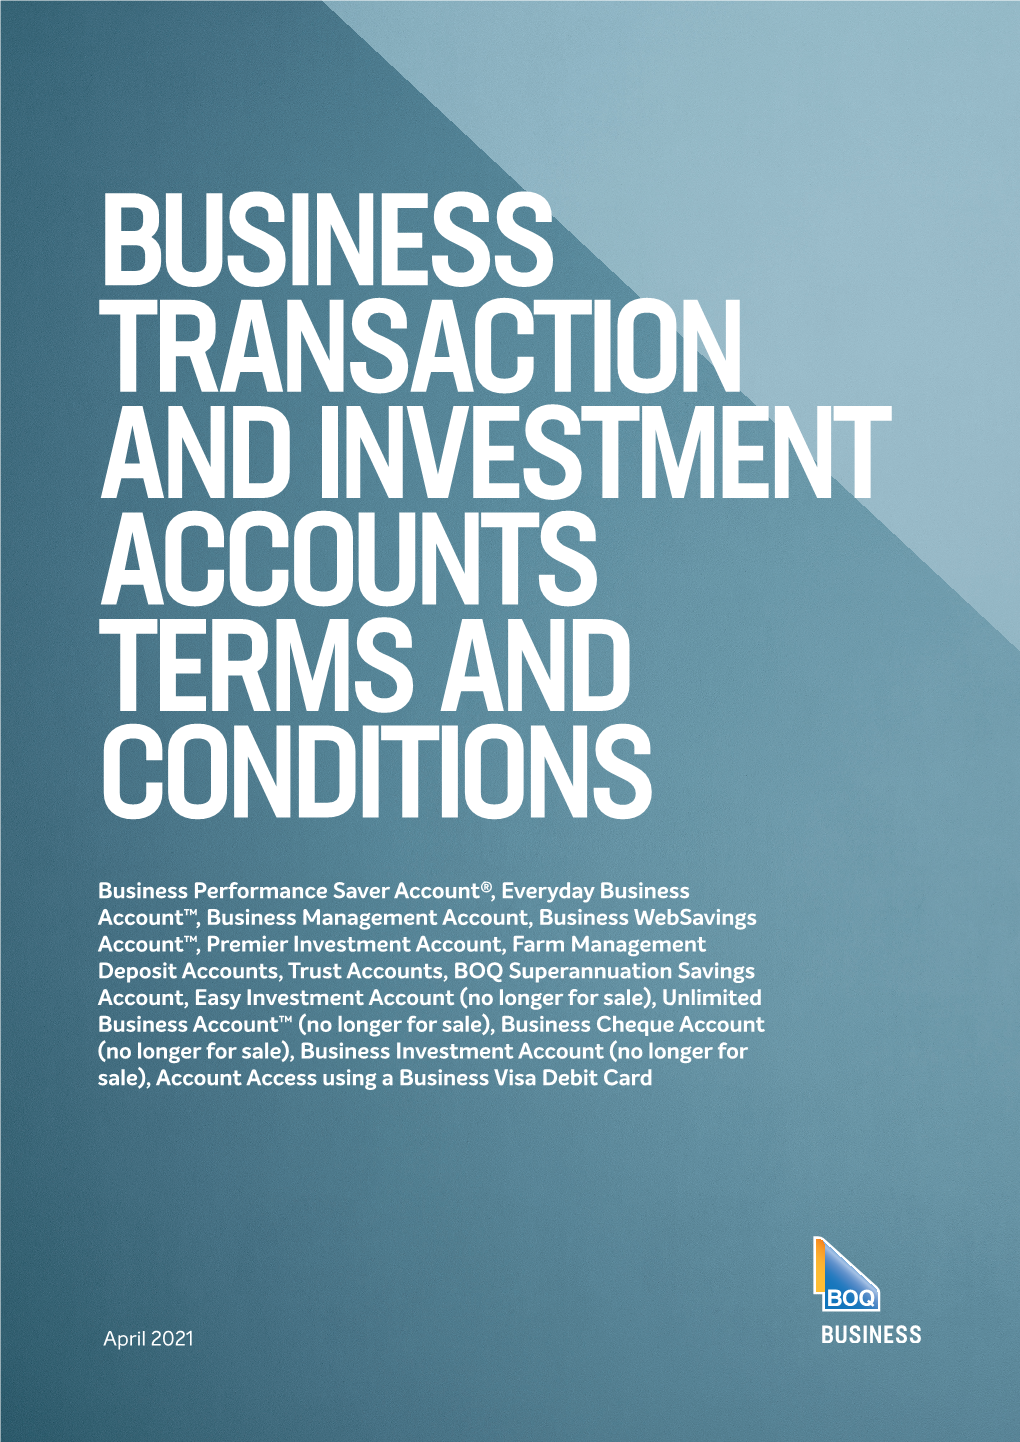 Business Transaction and Investment Accounts Terms and Conditions